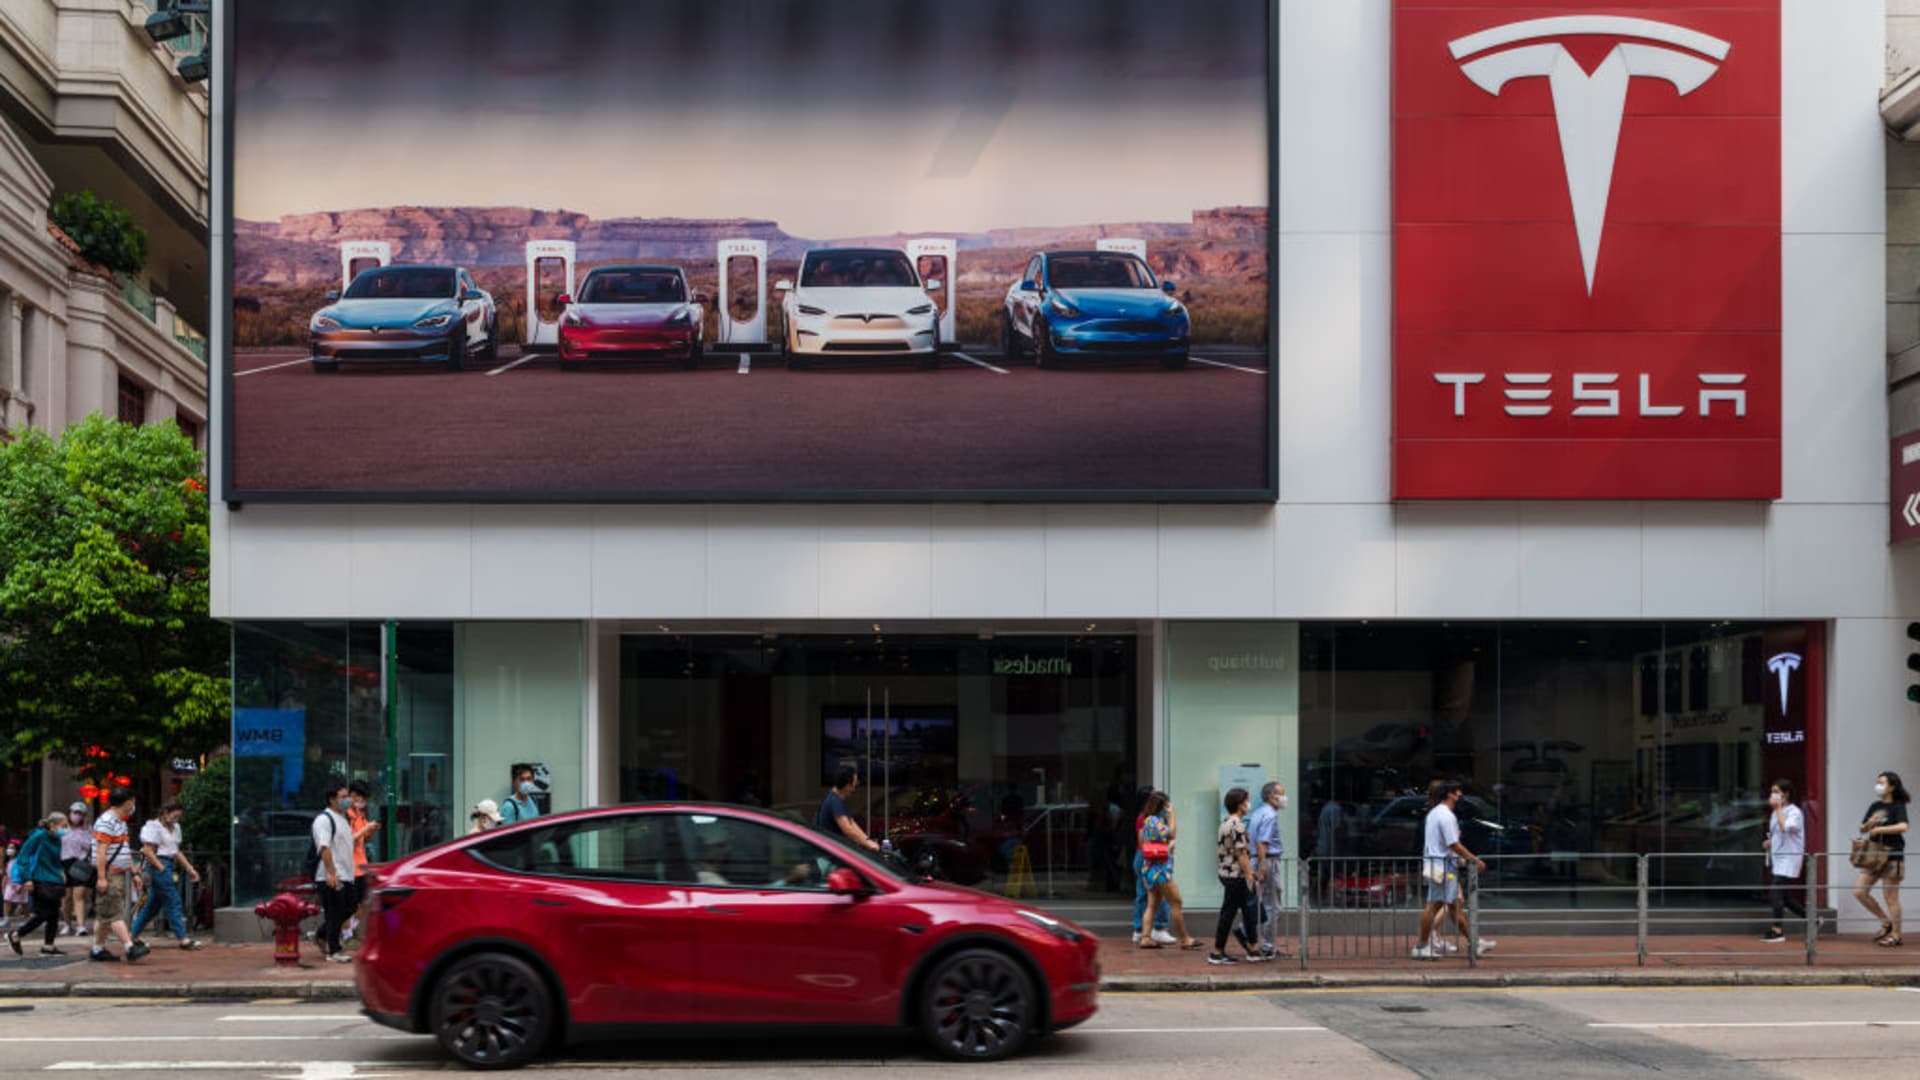 Tesla reports earnings after the bell Wednesday